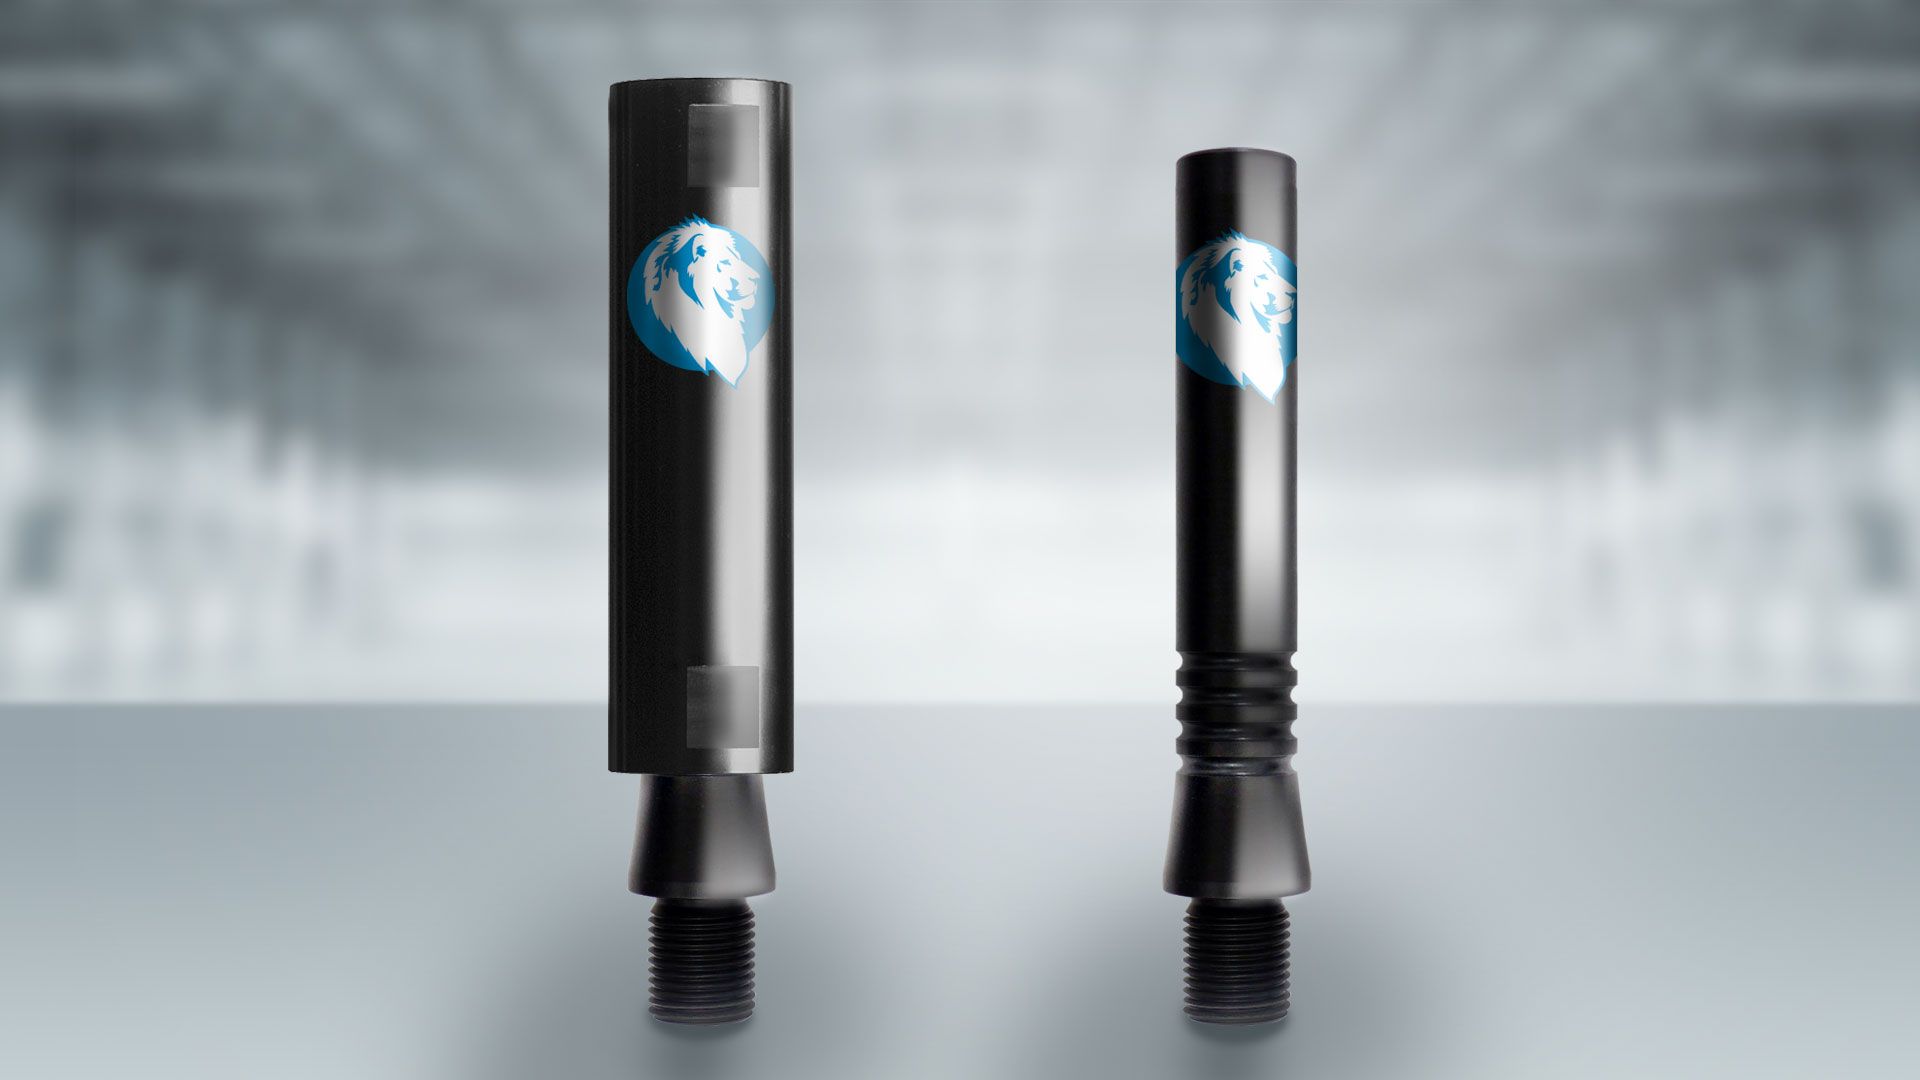 The White Lion round nozzle XL (left) and the White Lion Power round nozzle (right)